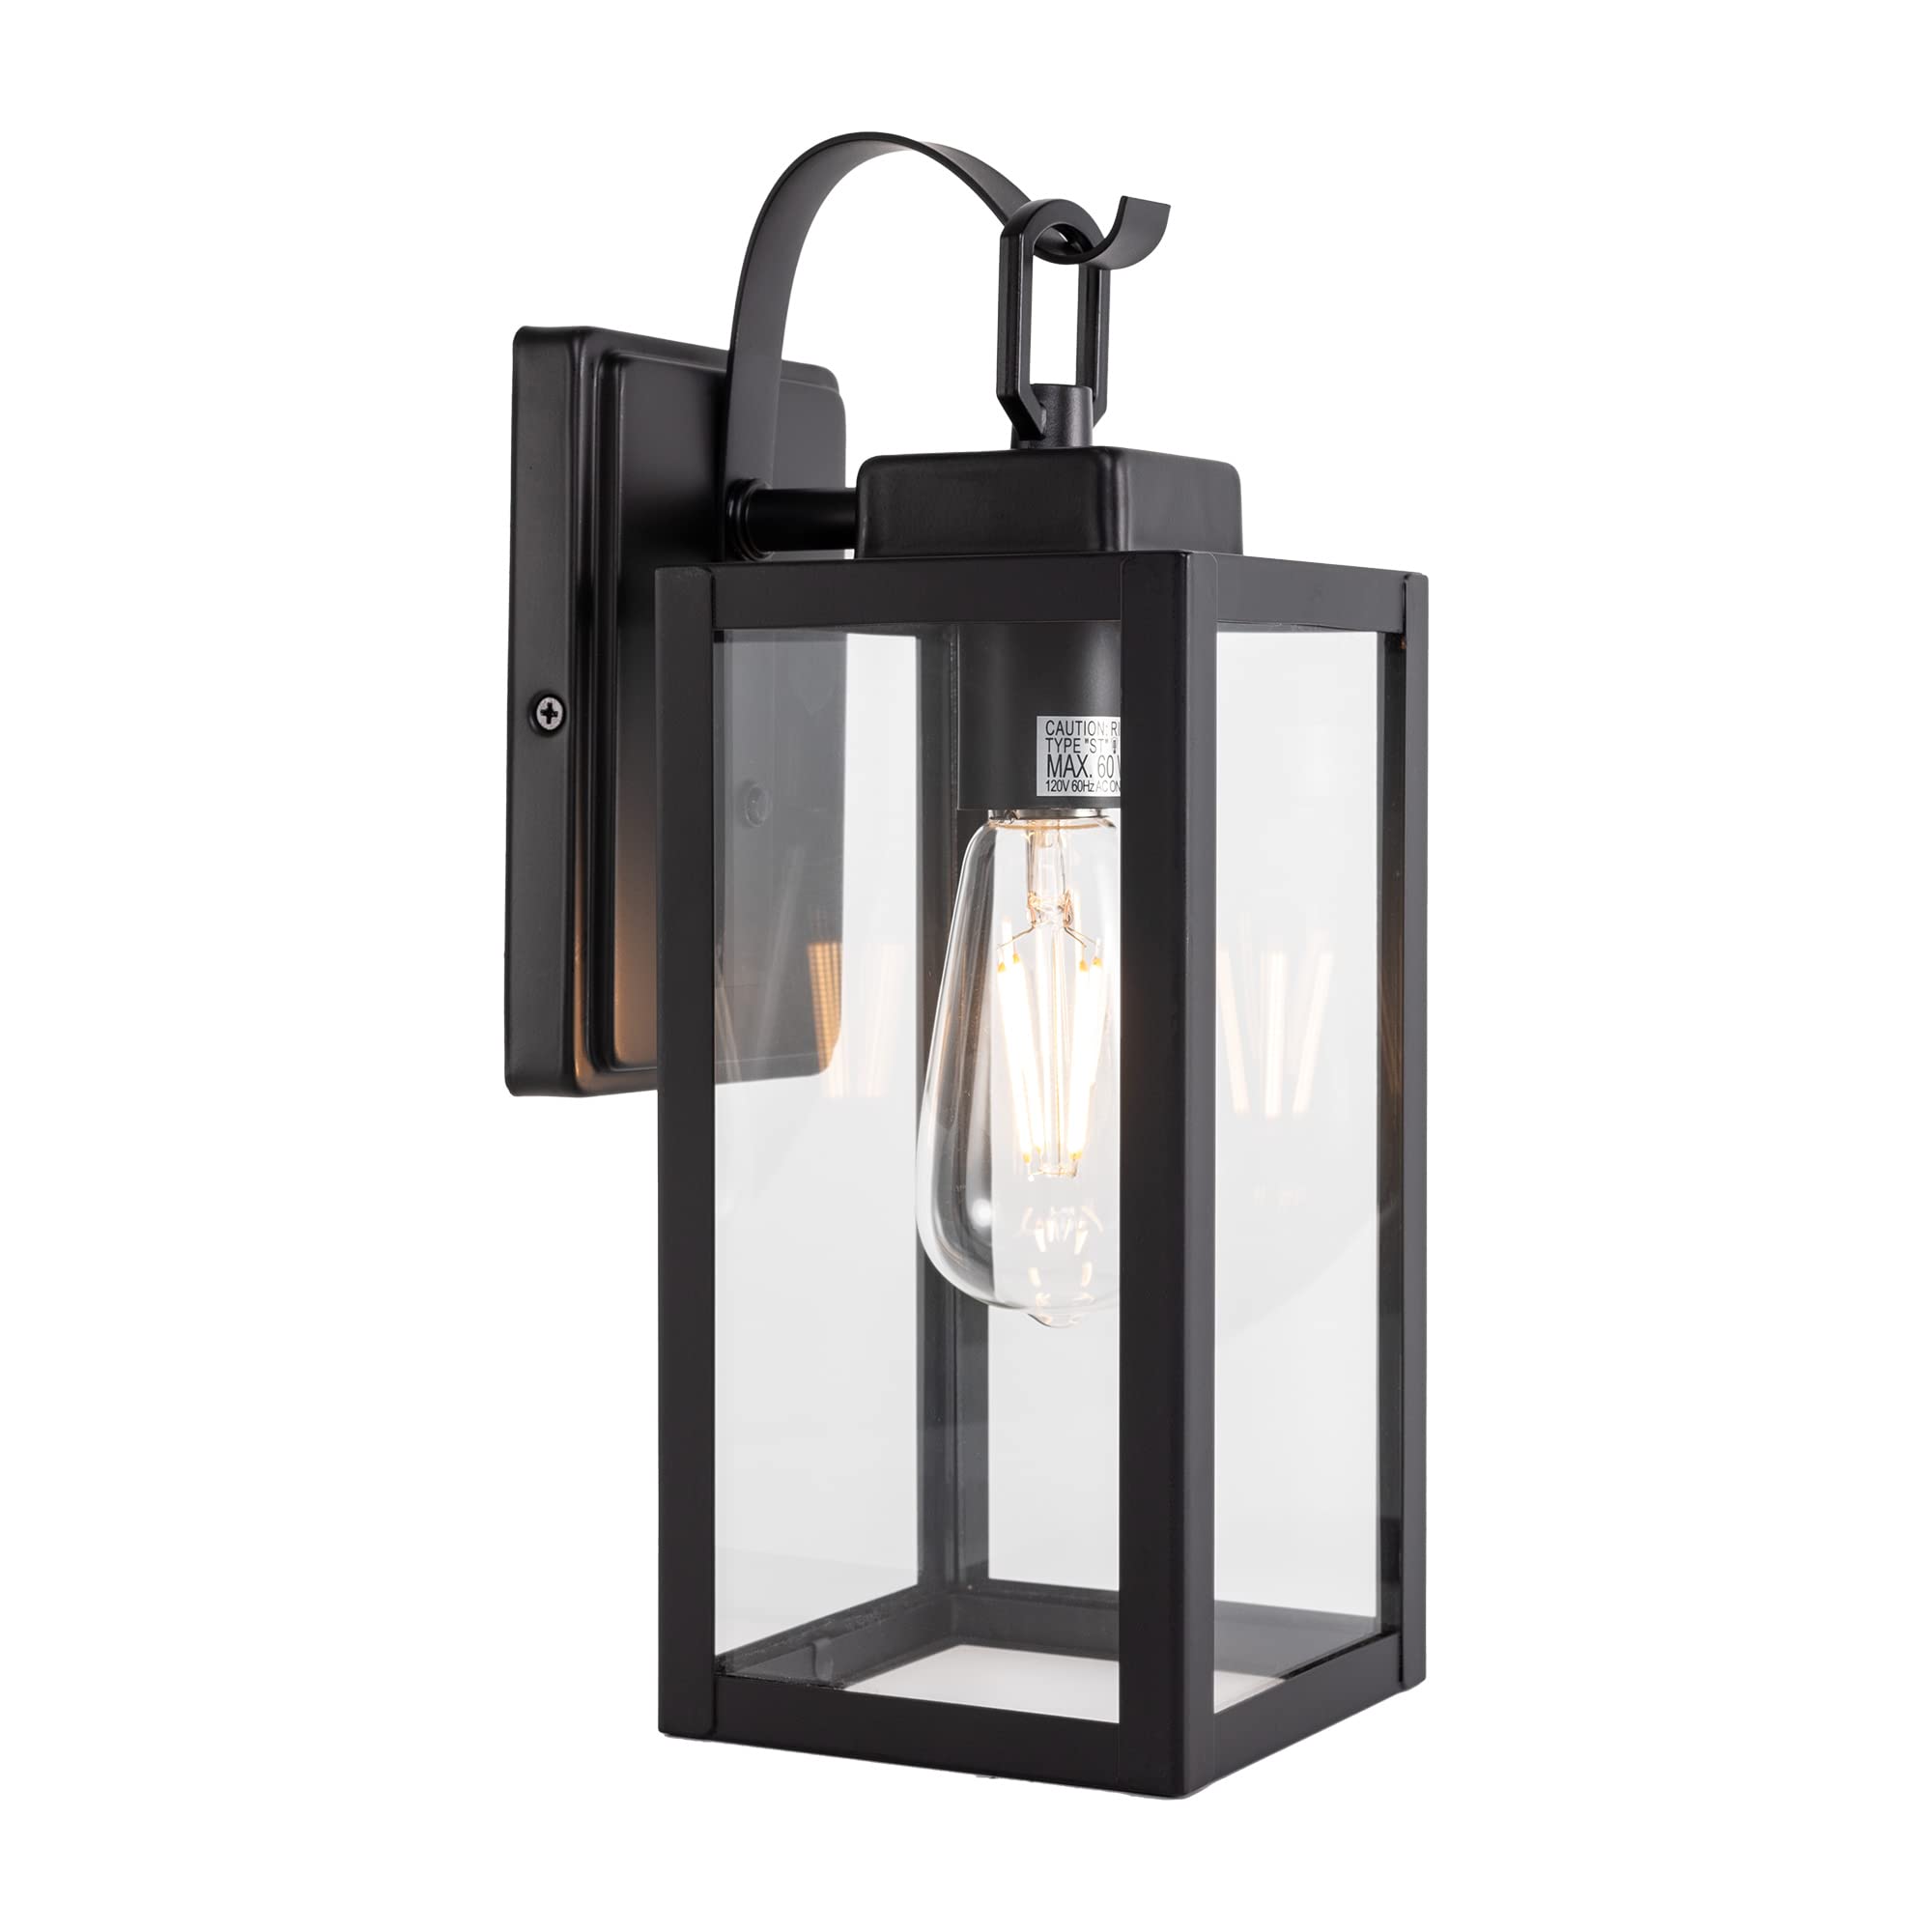 Gruenlich Outdoor Wall Lantern, LED Wall Sconce, E26 Base Max 60W, Metal Housing Plus Glass, Matte Black Finish, ETL Rated, Bulb Not Included, 1-Pack